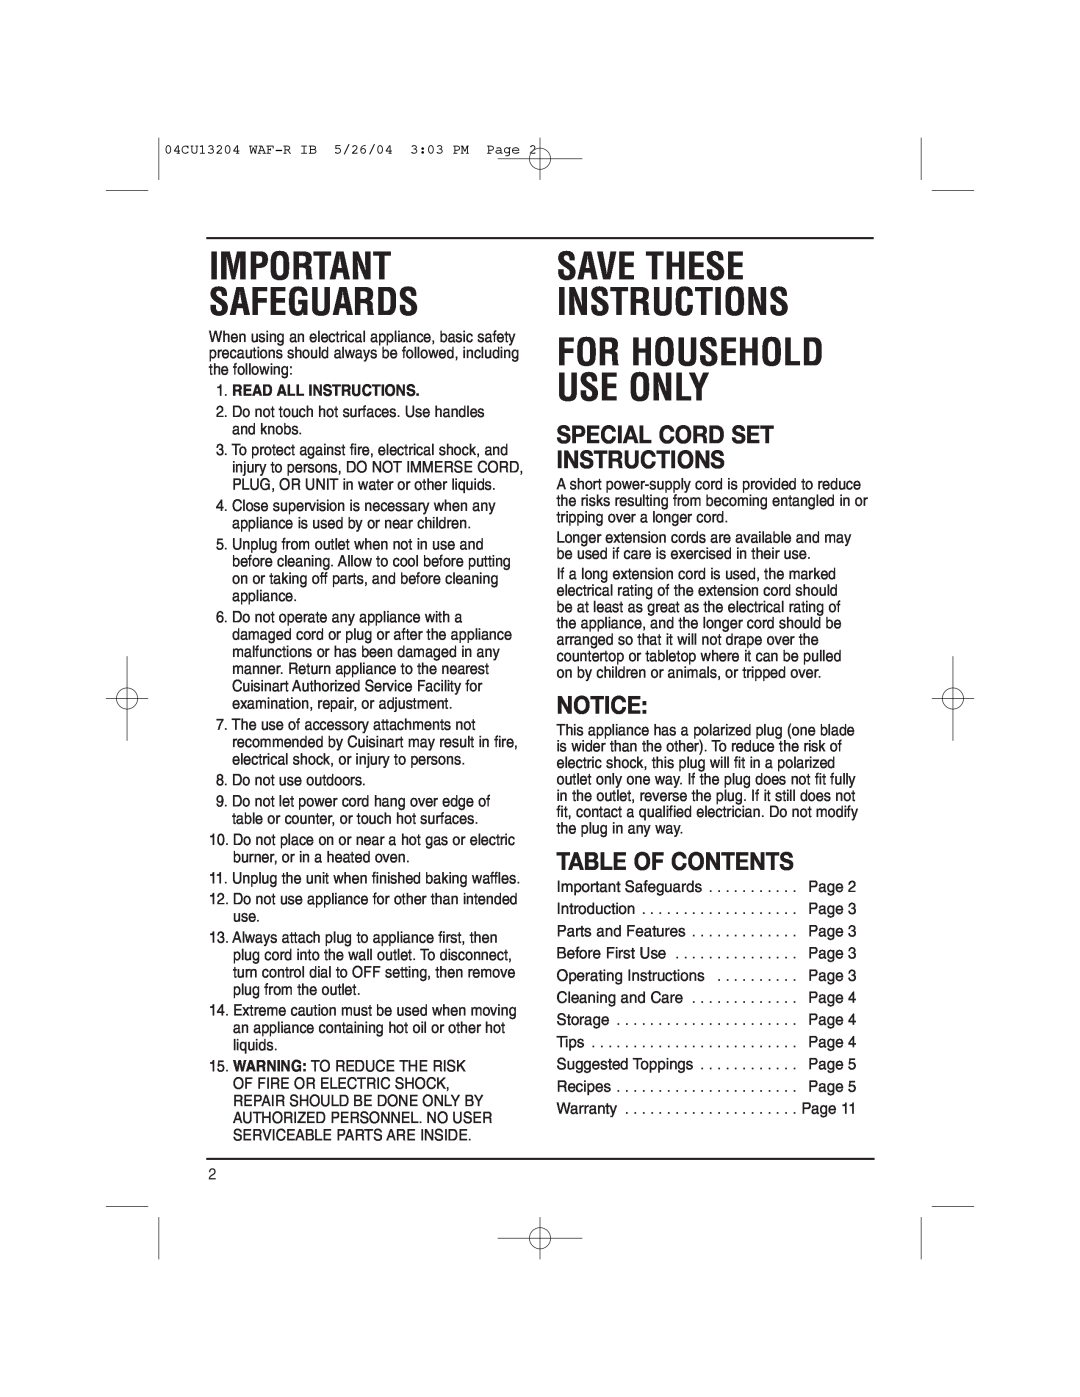 Cuisinart WAF-R manual Special Cord Set Instructions, Table Of Contents, Safeguards, Save These Instructions 